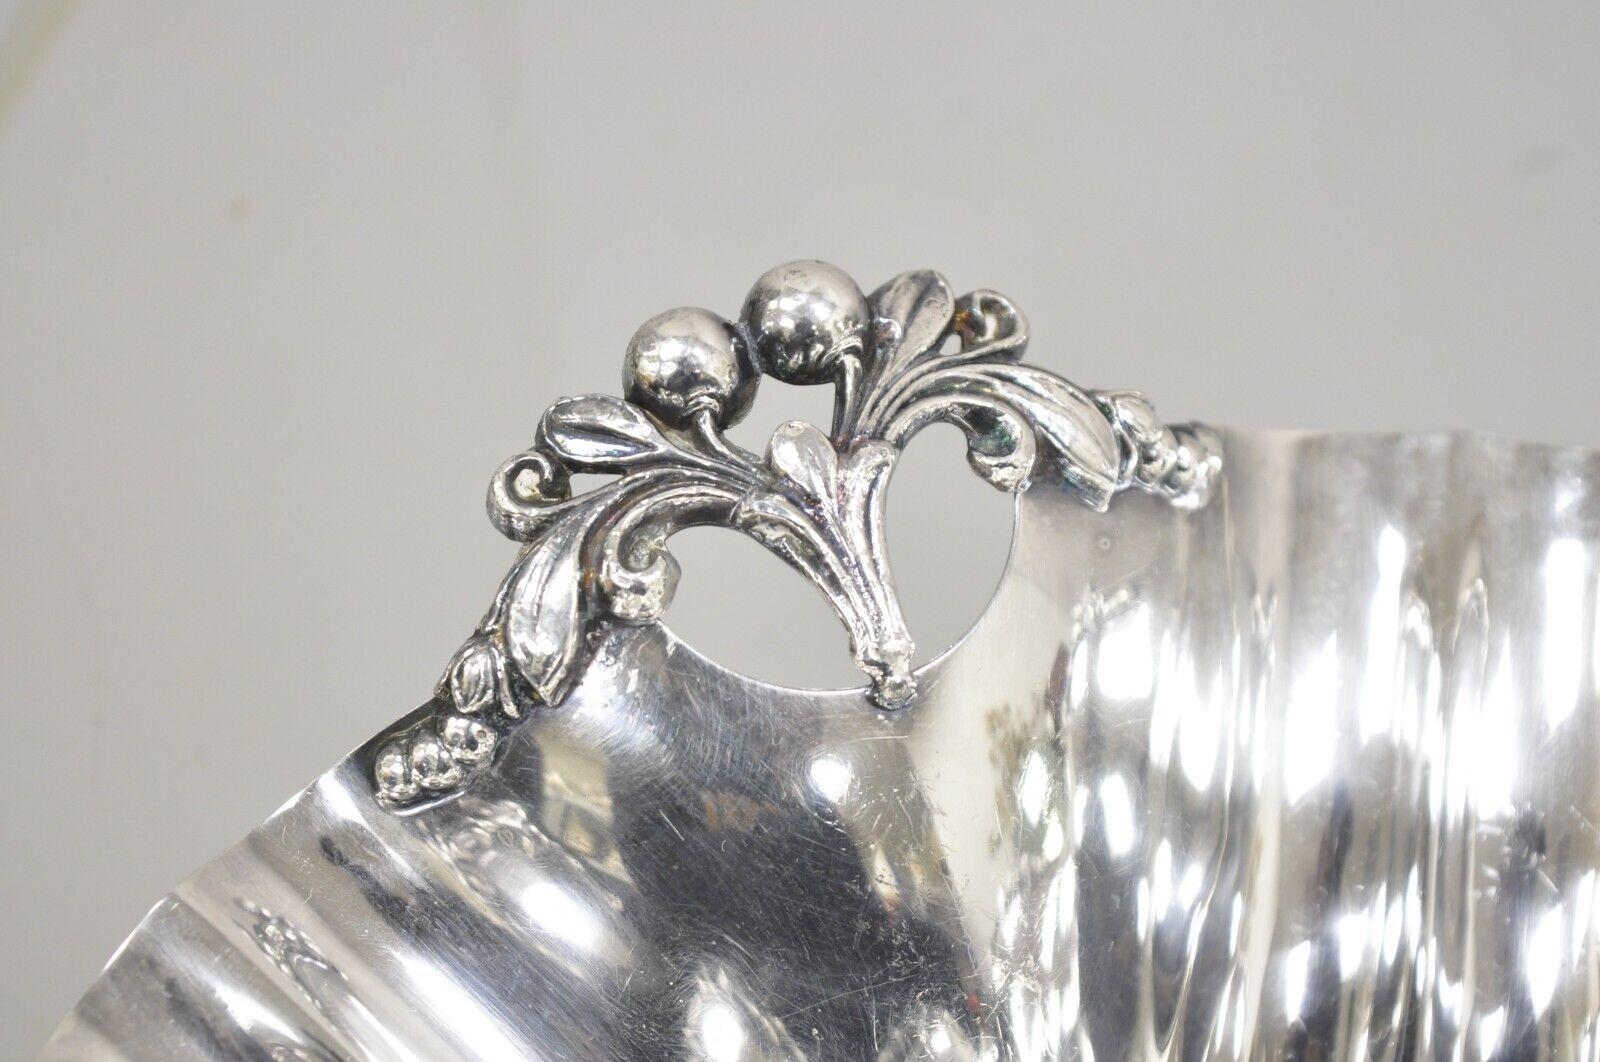 Vintage Victorian Silver Plated Handkerchief Candy Dish Fruit Bowl Berry Design For Sale 2